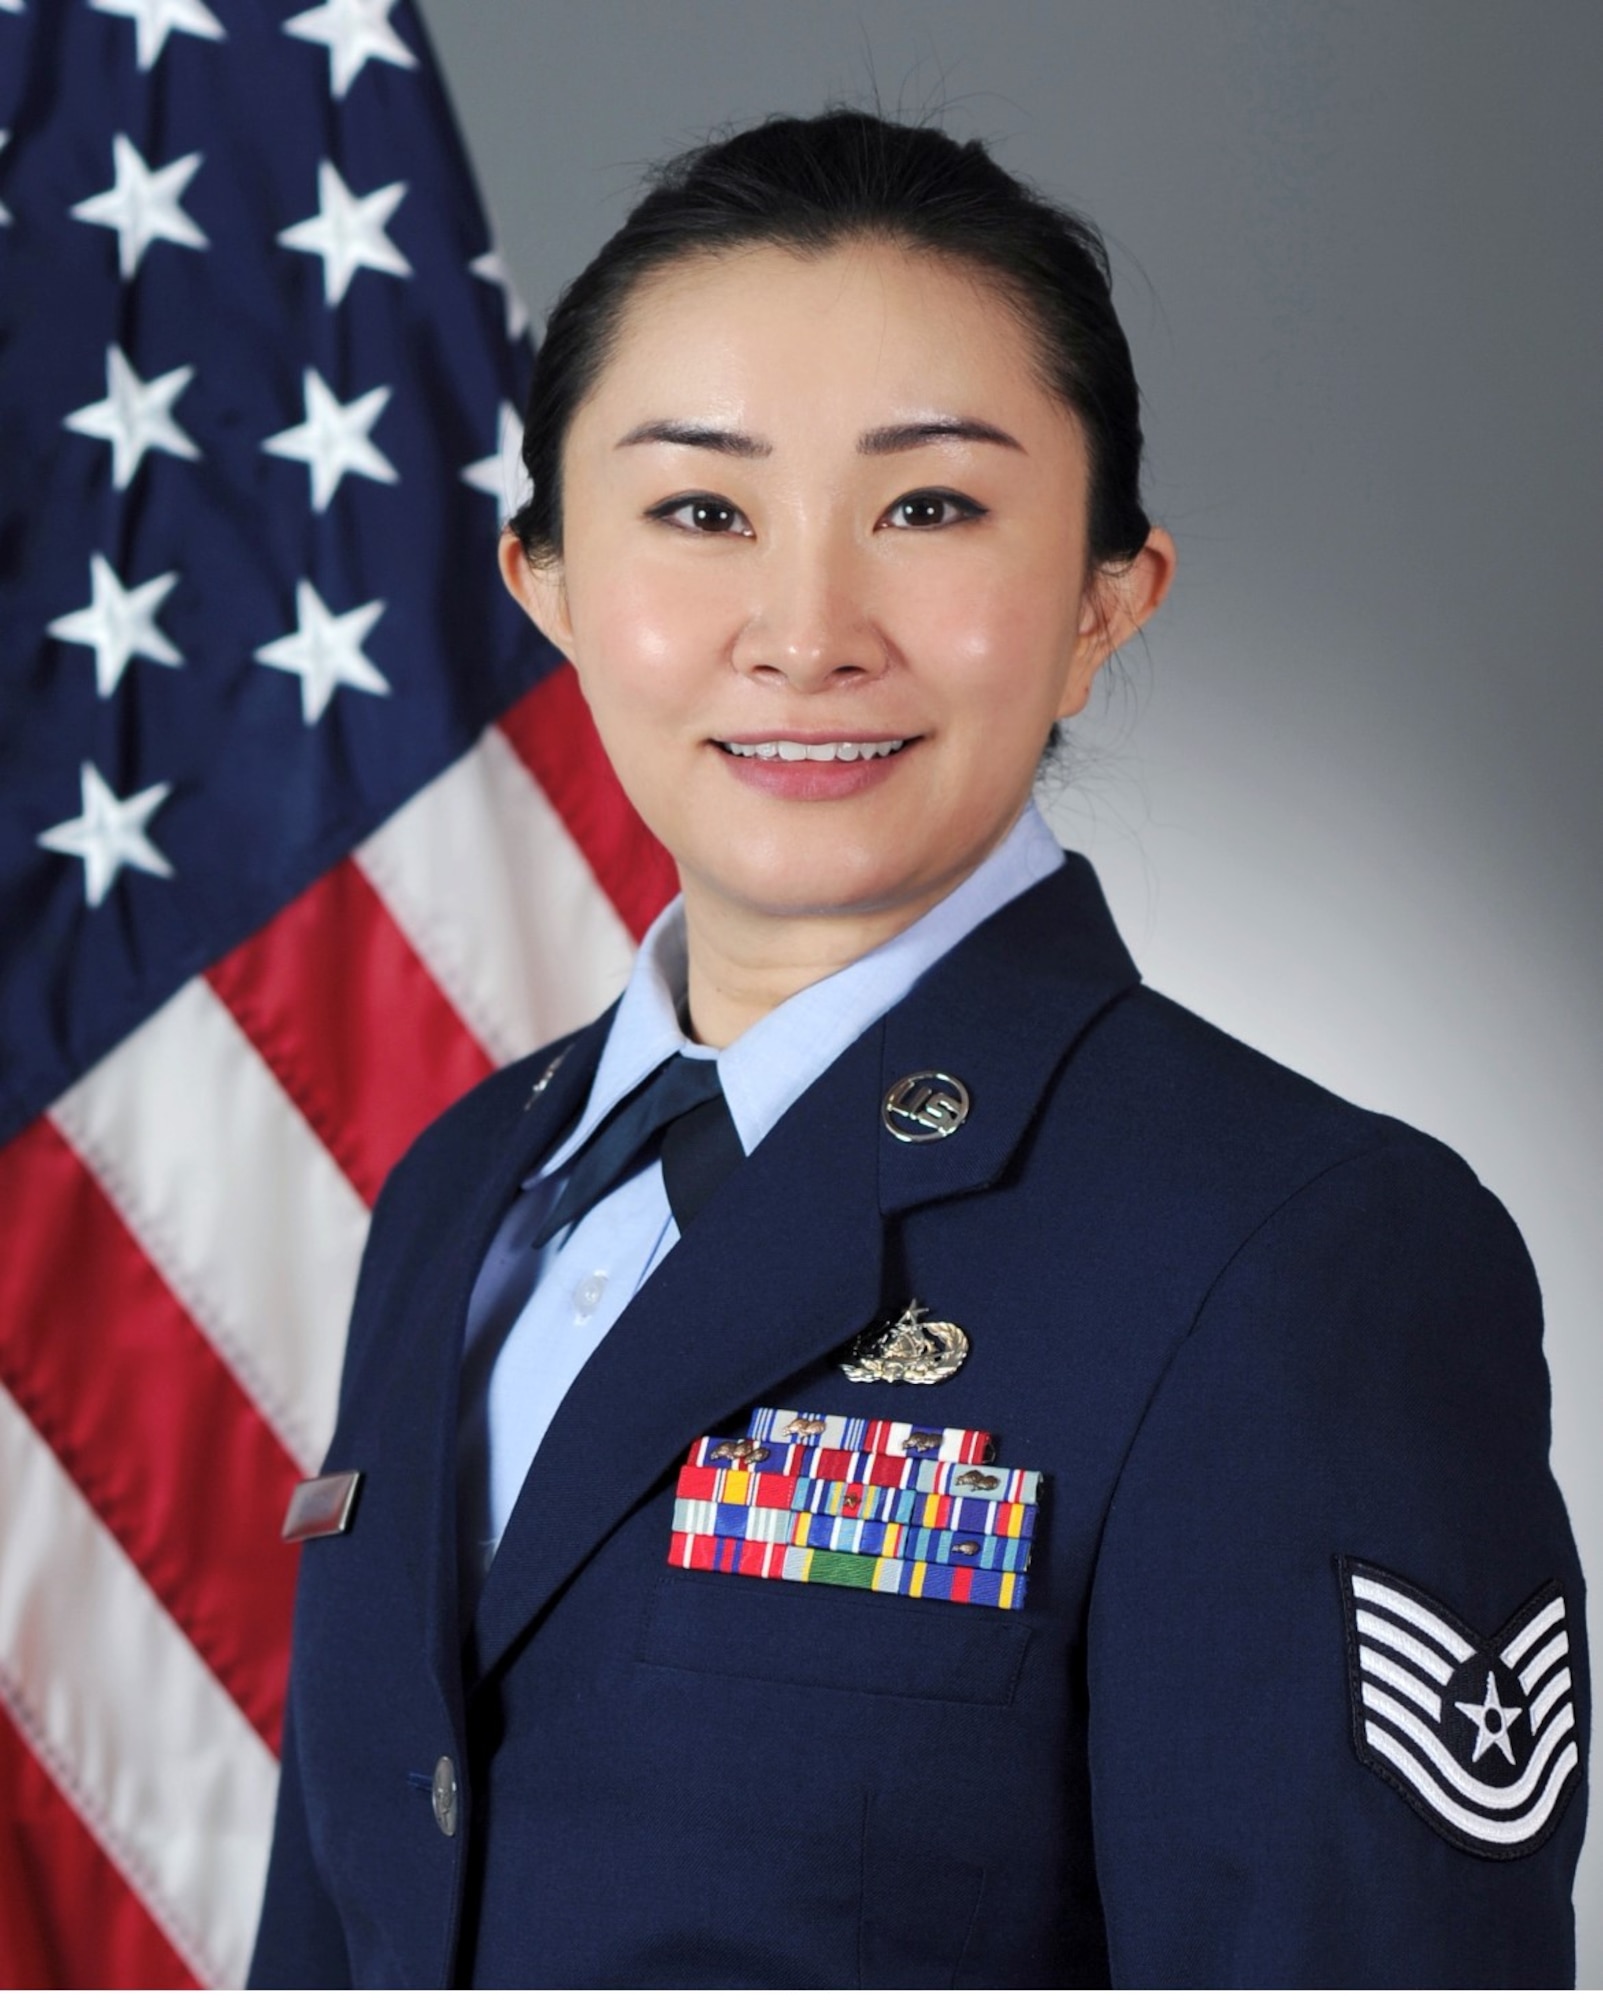 “As much as I struggle between two very different cultures as a 1.5 generation immigrant and feel the pain of fighting the battles to resolve the conflicts, I also feel empowered and obligated to utilize this gift and ability to help others overcome misunderstandings and bridge cultures and civilizations. This is also my advice to Airmen interested in LEAP: remember our obligations and responsibilities, build the bridges with our language skills, and find a balanced world of peace and prosperity.” Mandarin Chinese LEAP Scholar Tech. Sgt. Jennifer Shelton said.